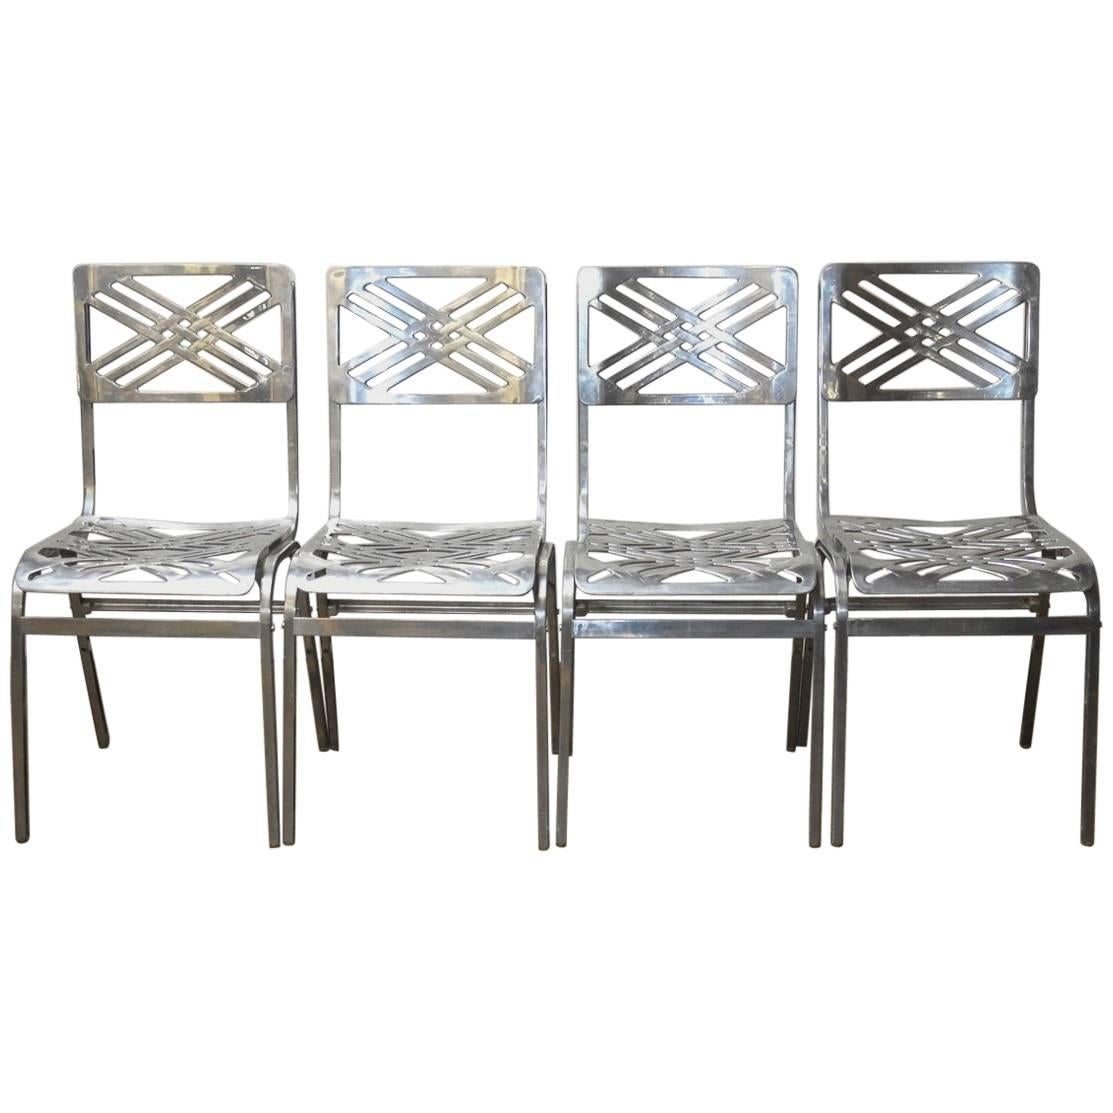 French Aluminum Eiffel Tower Chairs by Gallerie for Slavik